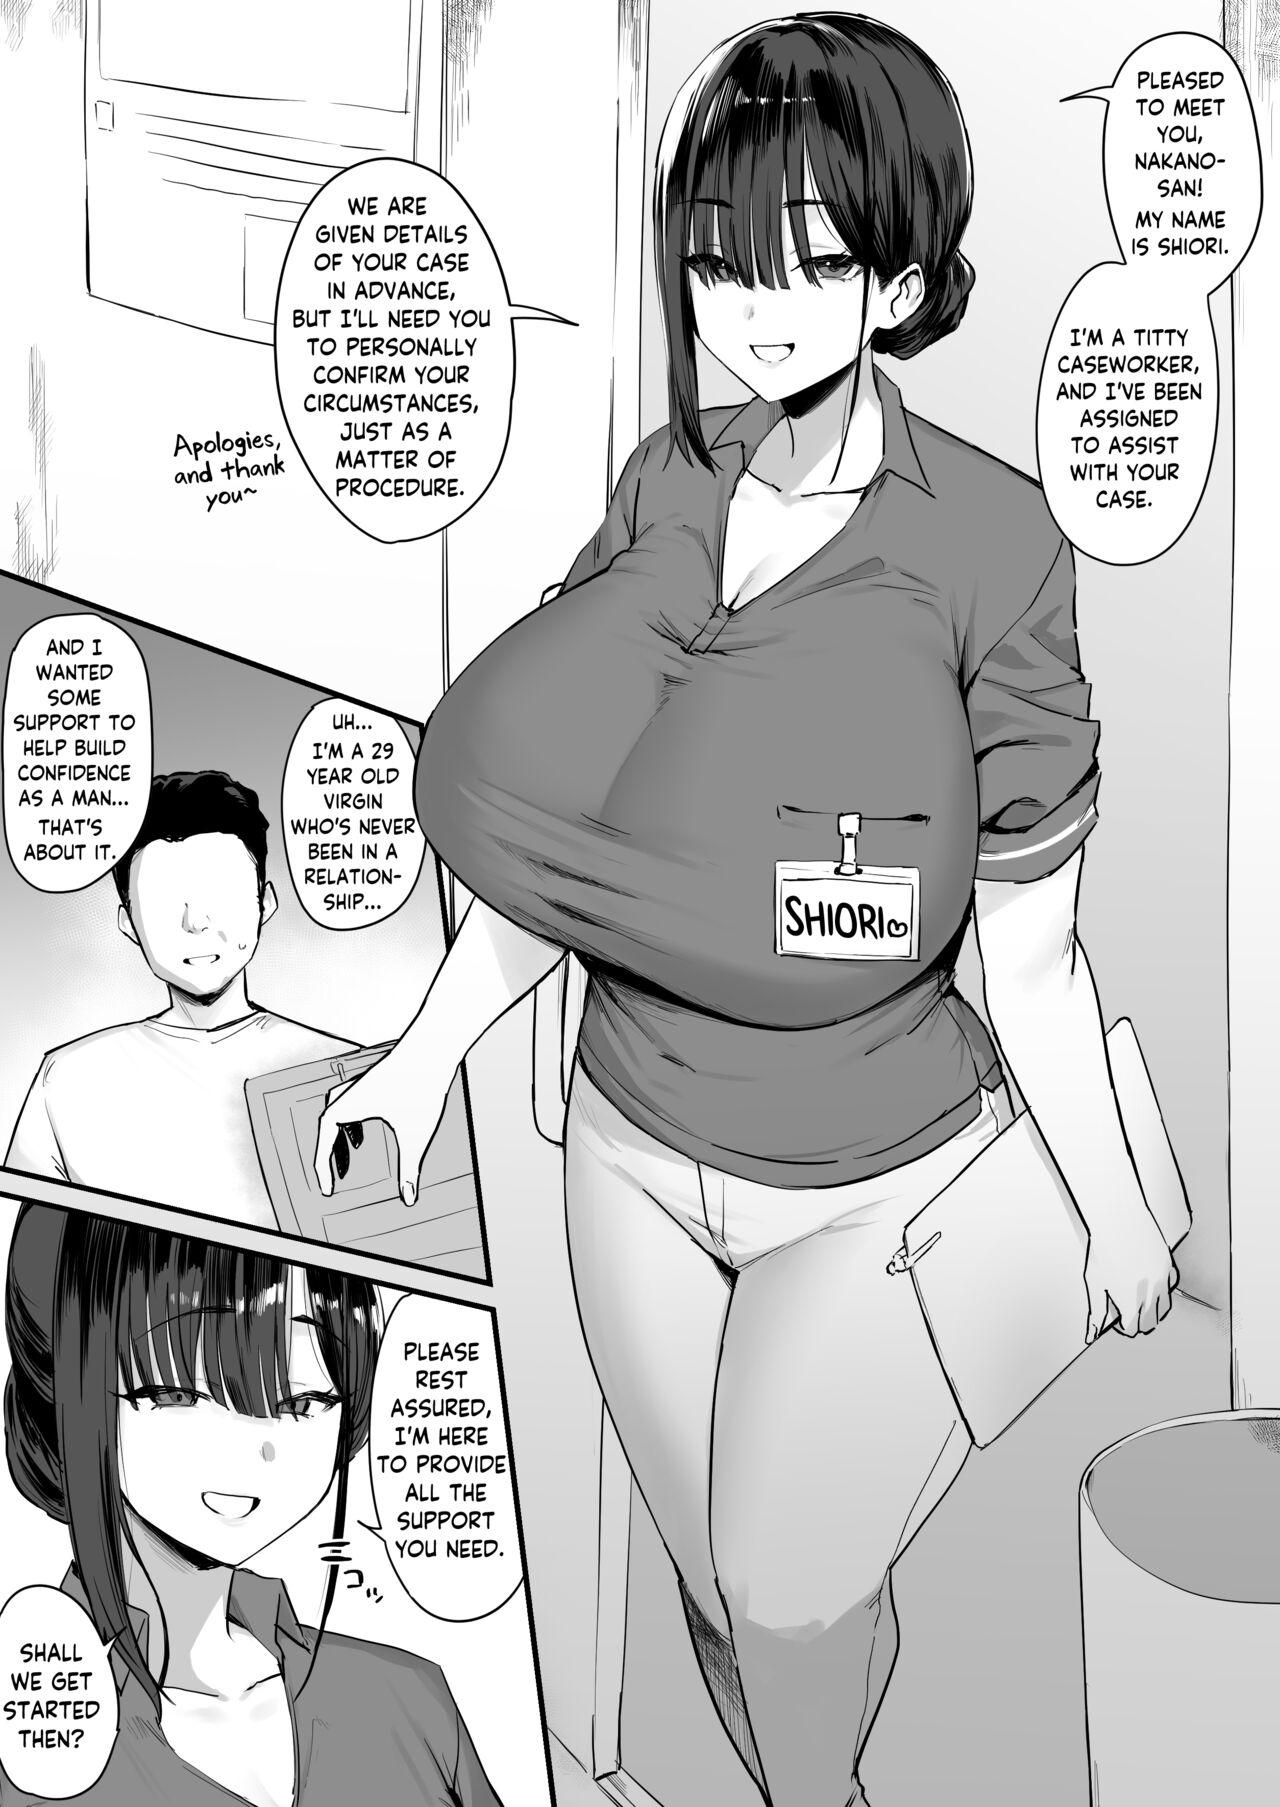 HD Oppai Caseworker | Titty Caseworker - Original Married - Page 1